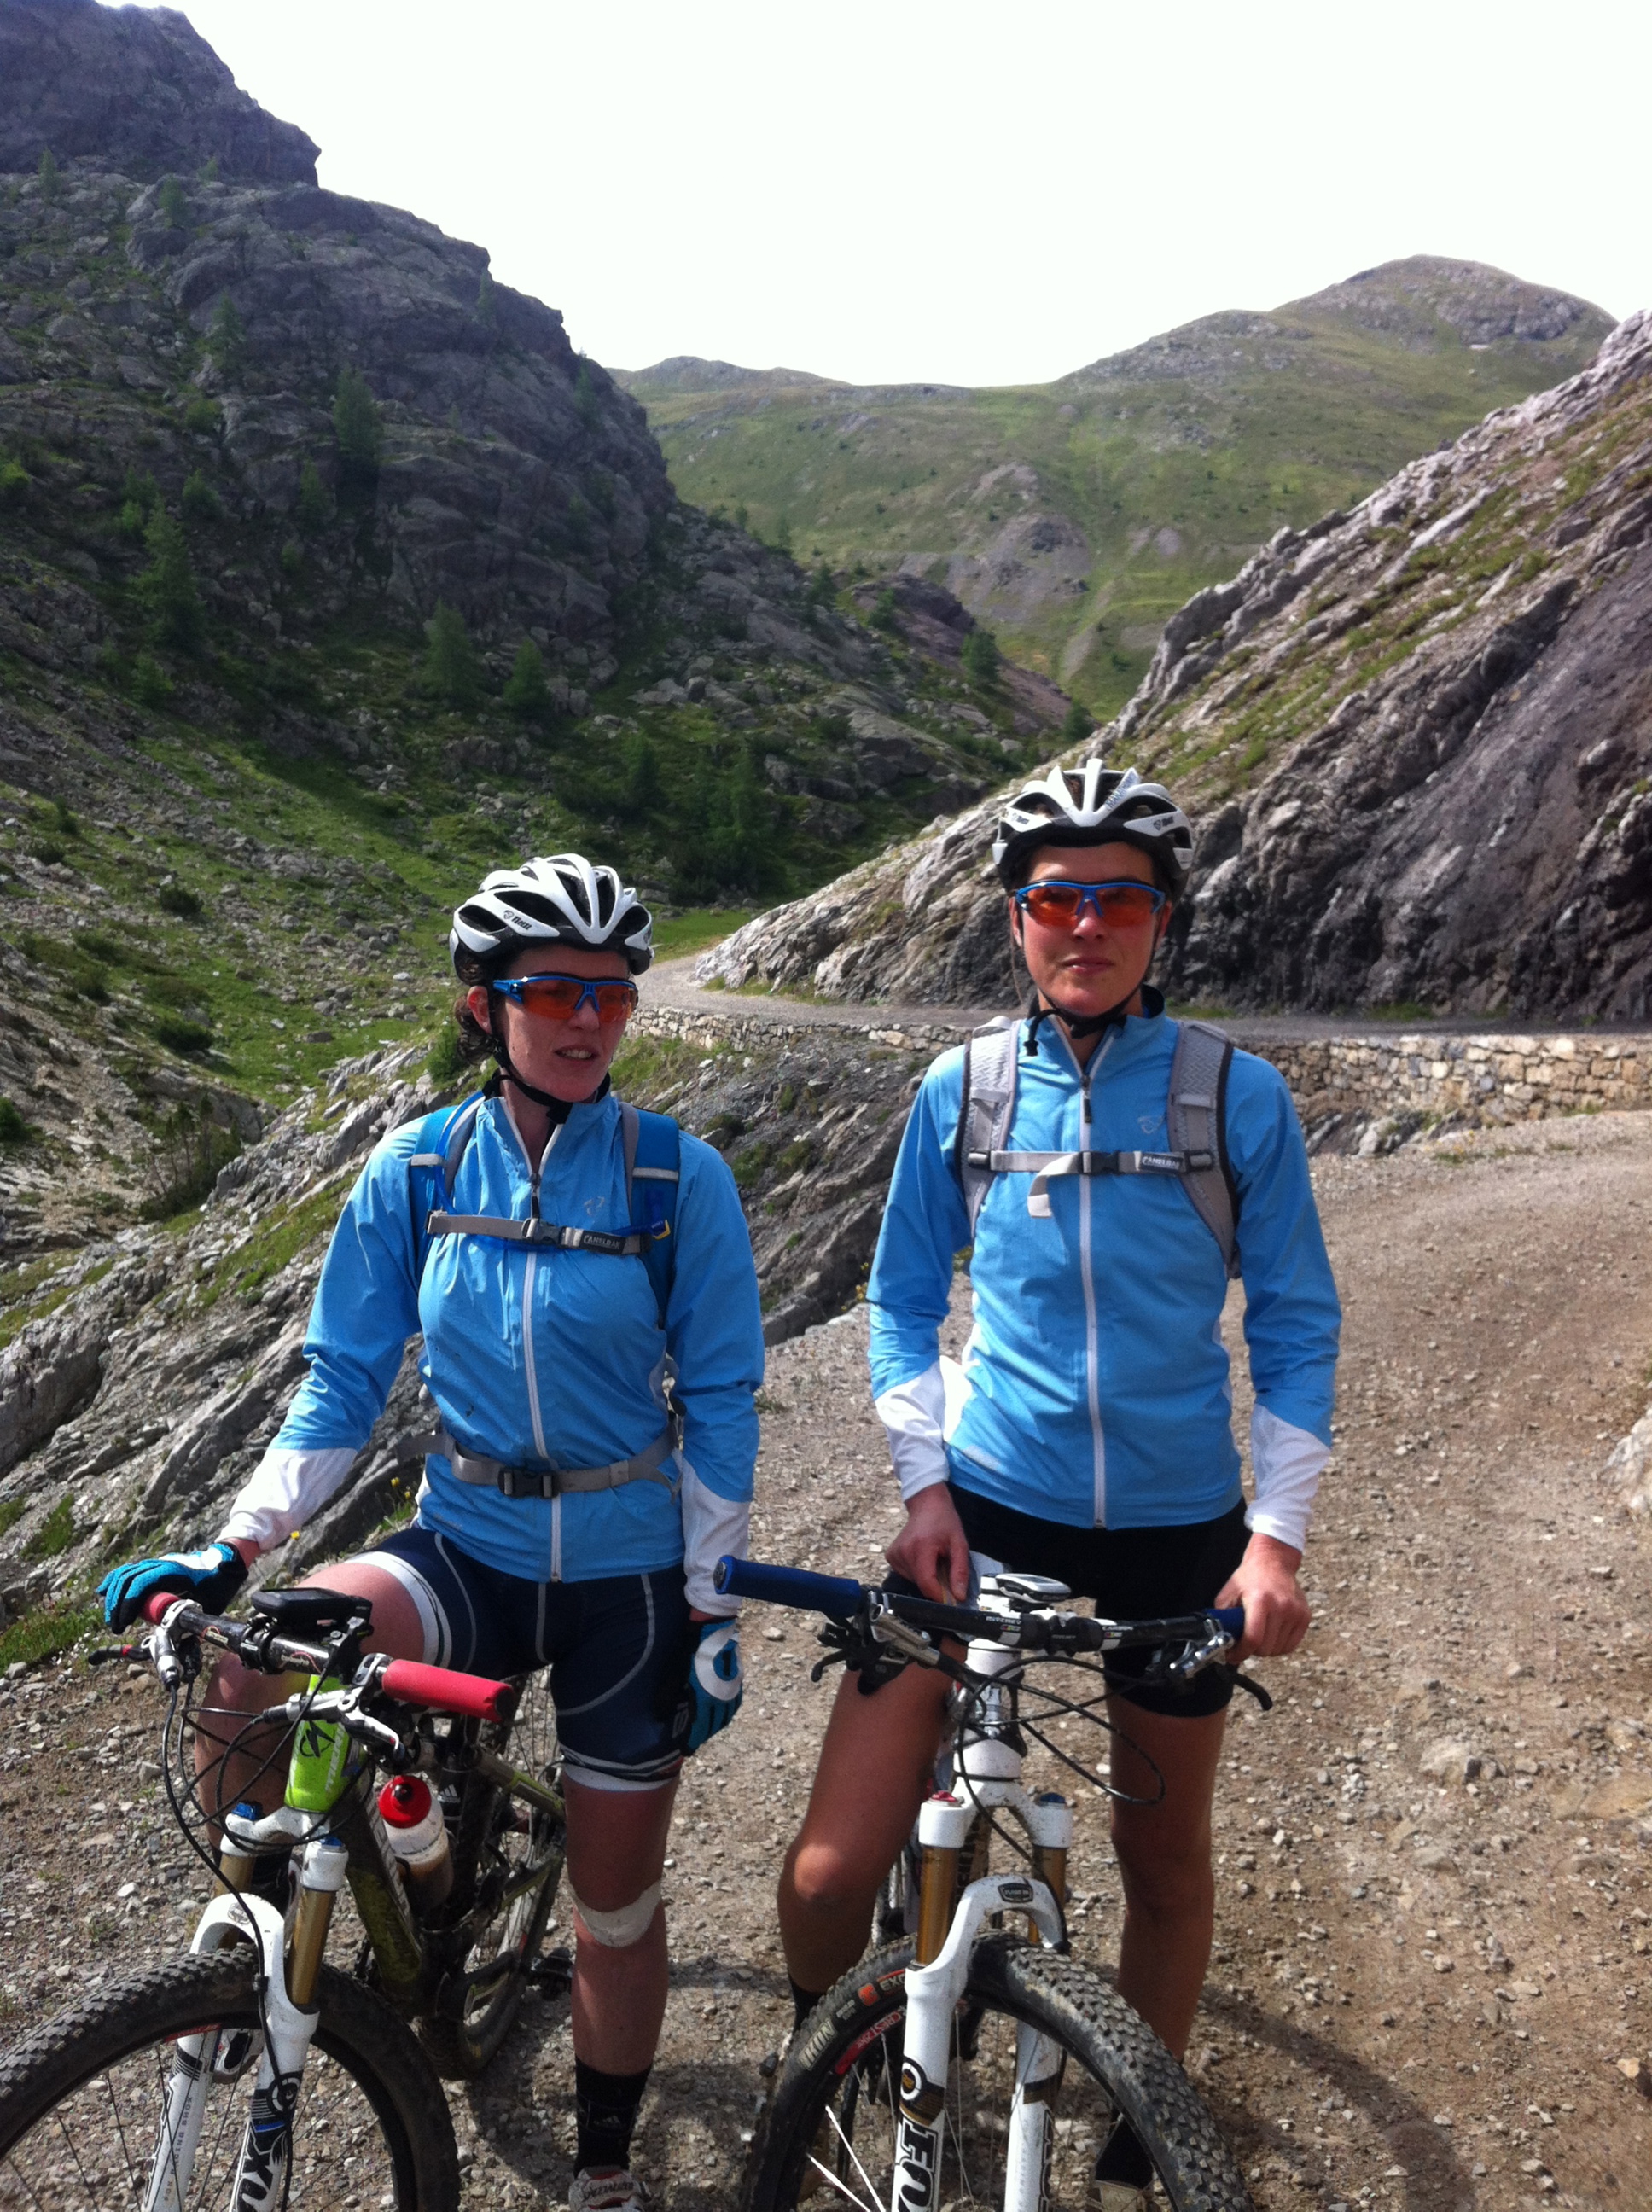 Kath Bicknell and Naomi Hansen, prepared for a good day in the mountains. From Livigno on the way to the Val Mora in Italy.